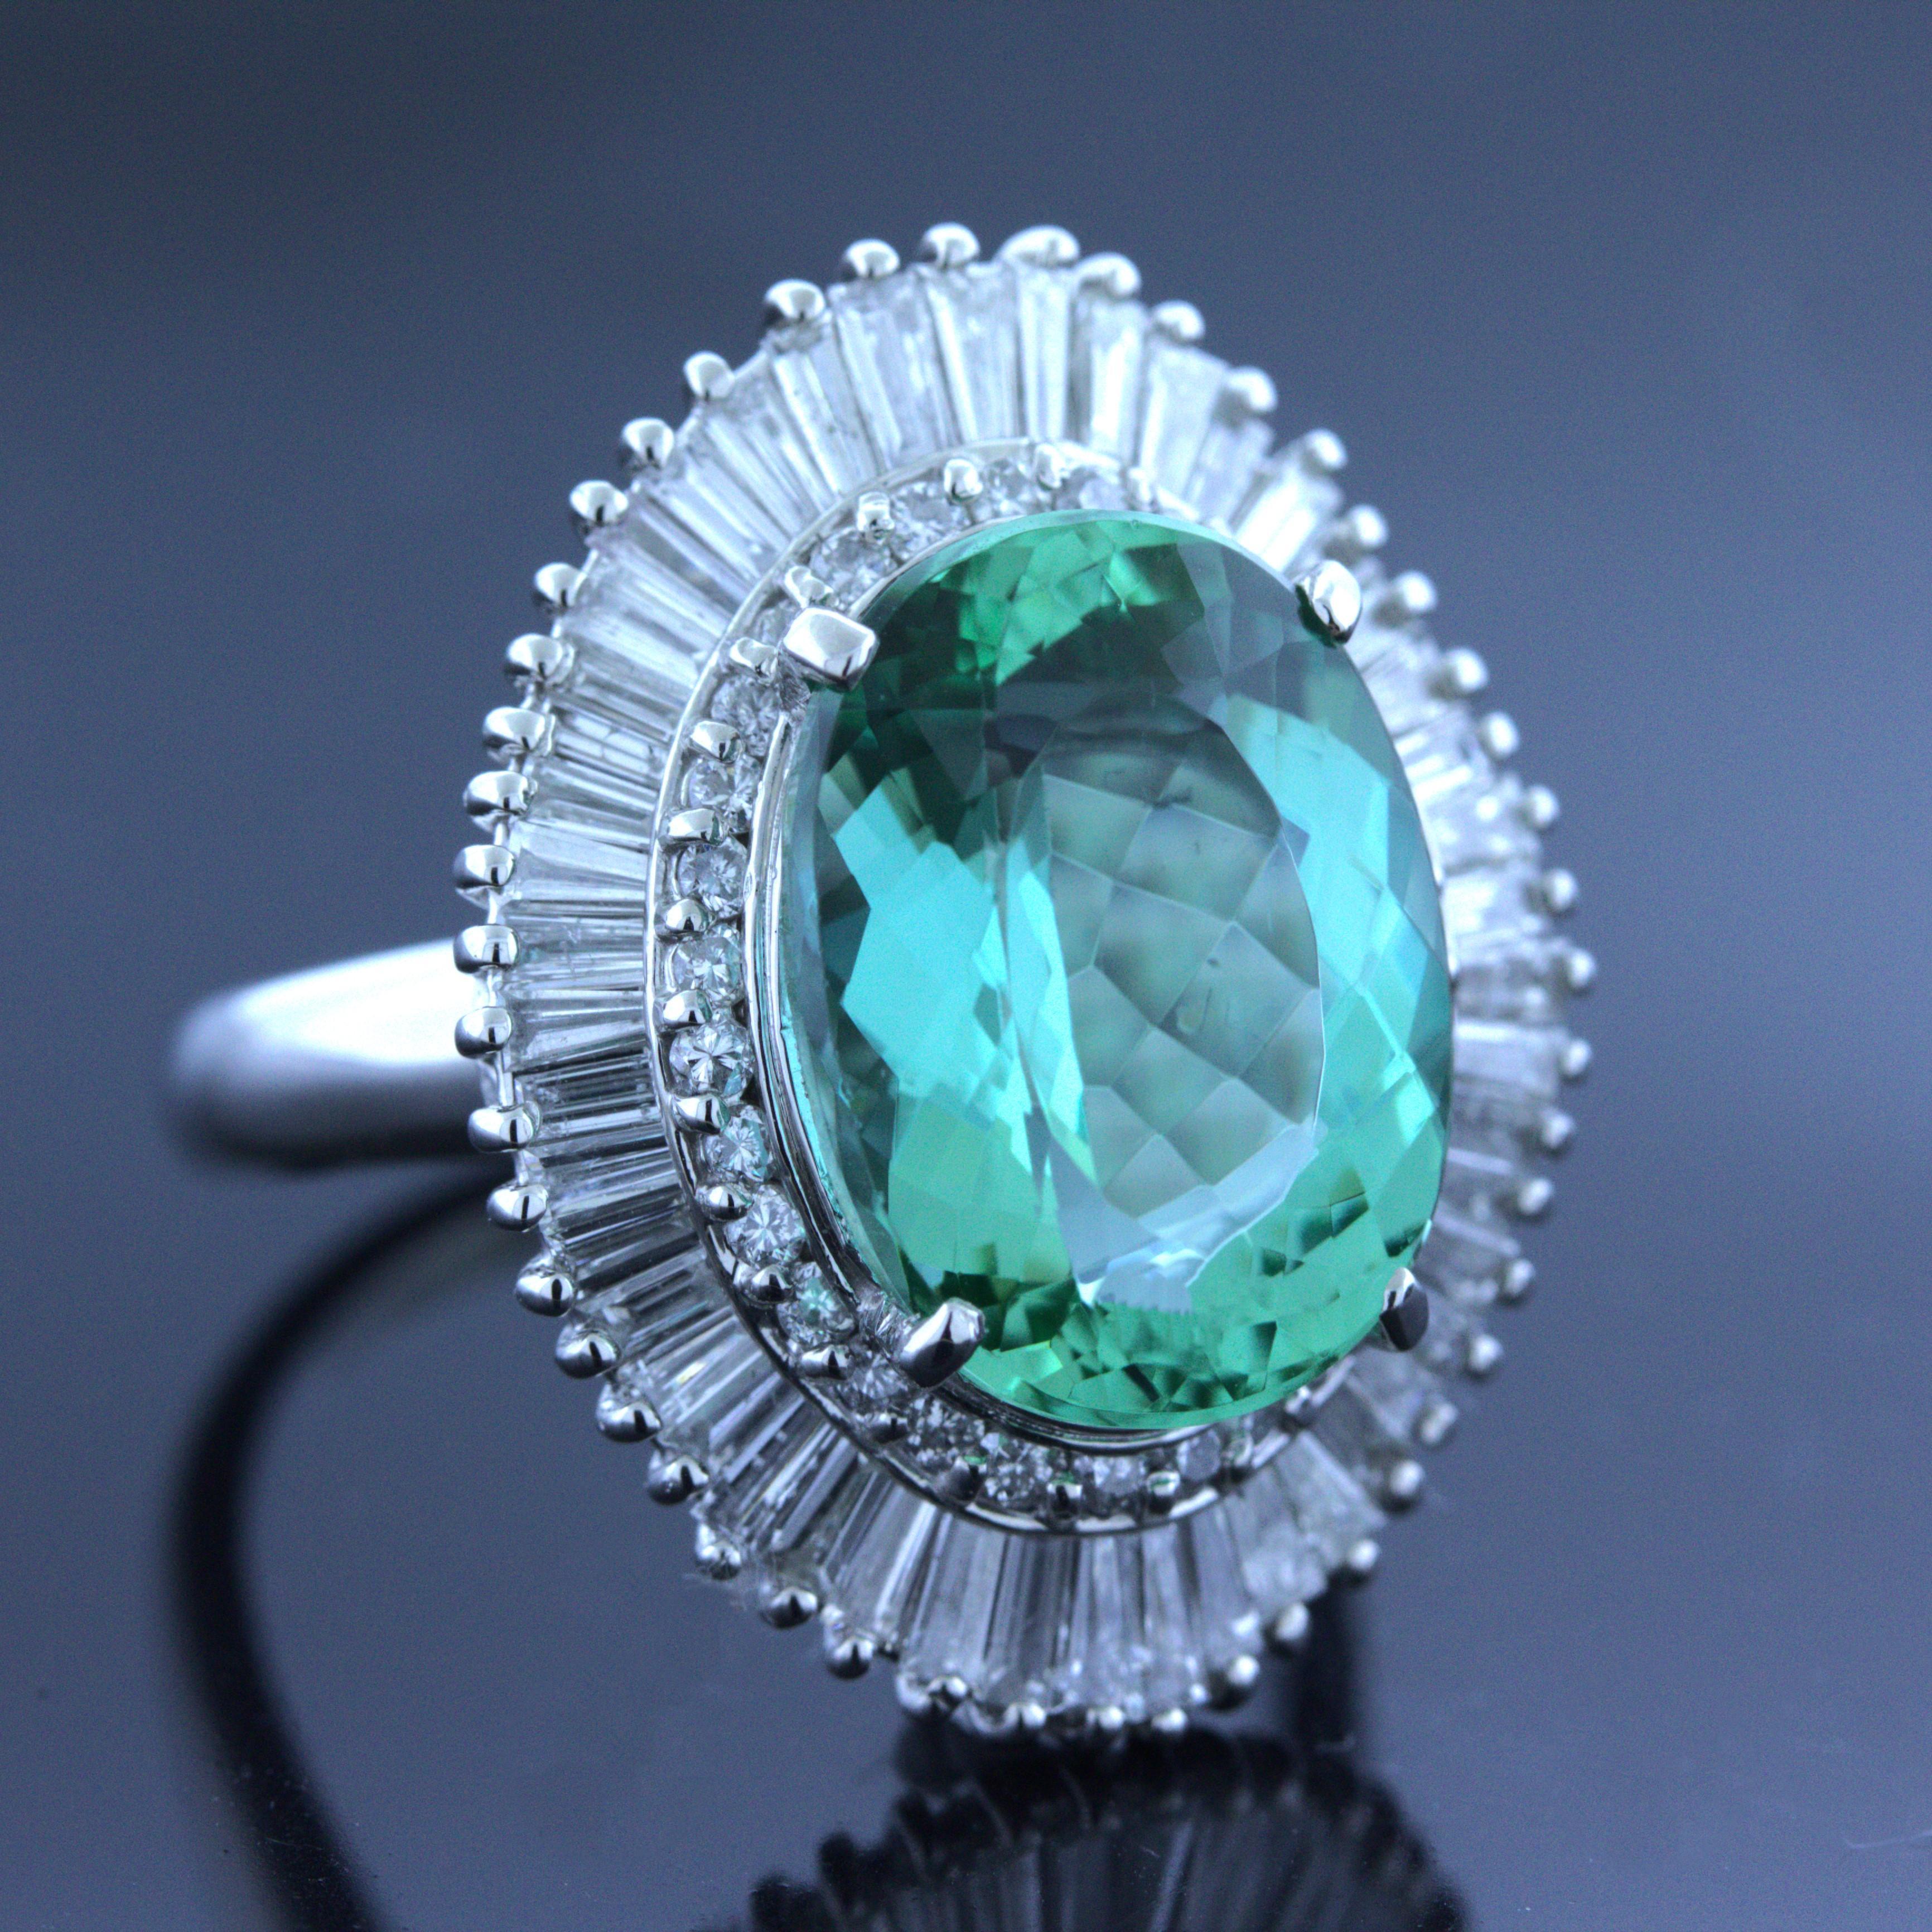 A beautiful and rare tourmaline having a very special “mint” color not often seen in the trade. It weighs 7.41 carats and has a minty alpine green color that no other gemstone can produce. It is even hard to find a tourmaline with this color. It is